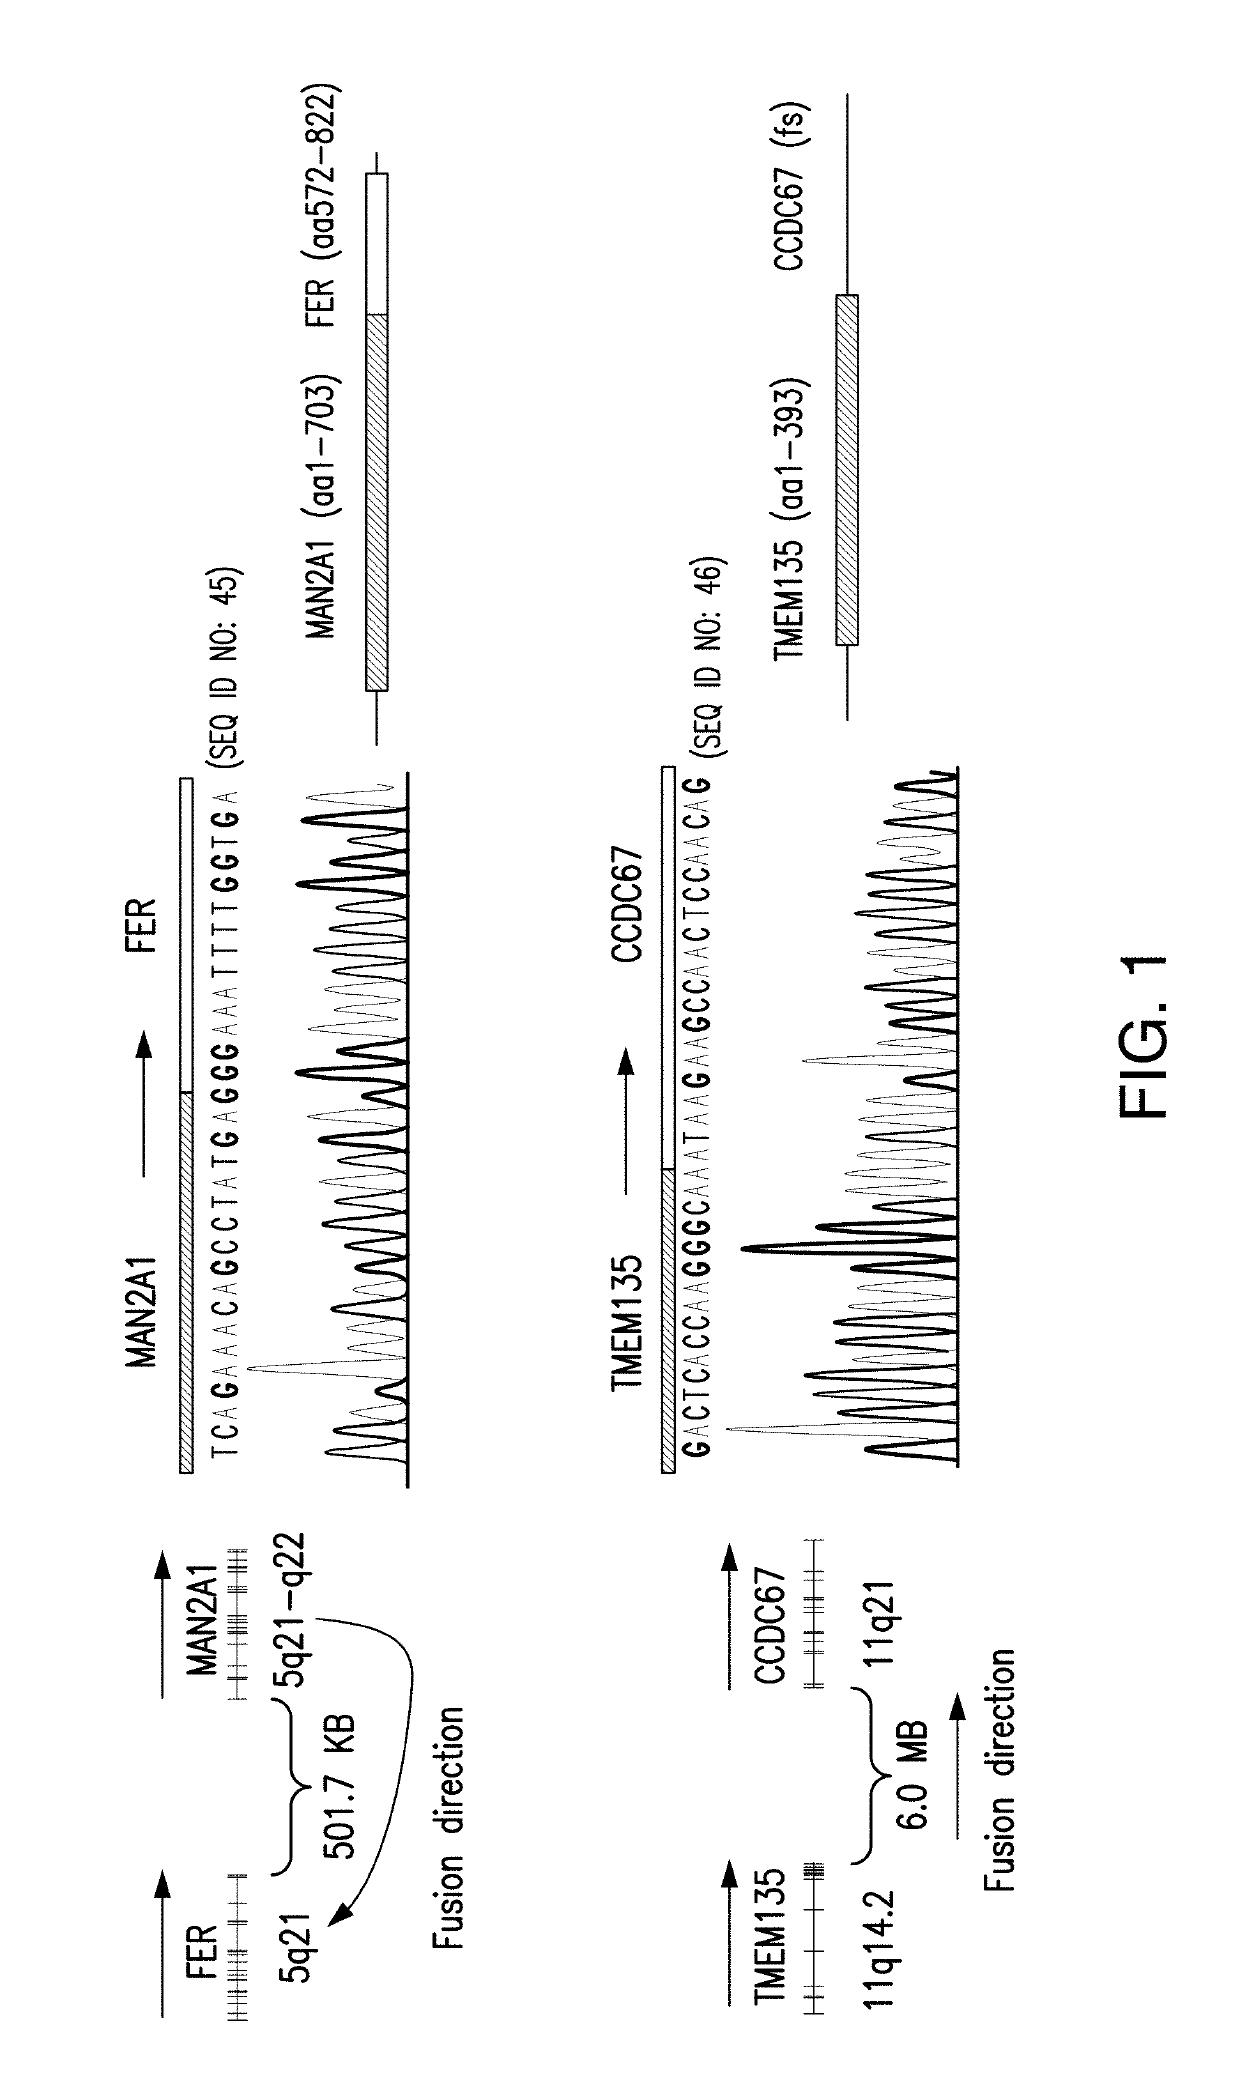 Methods for treating cells containing fusion genes